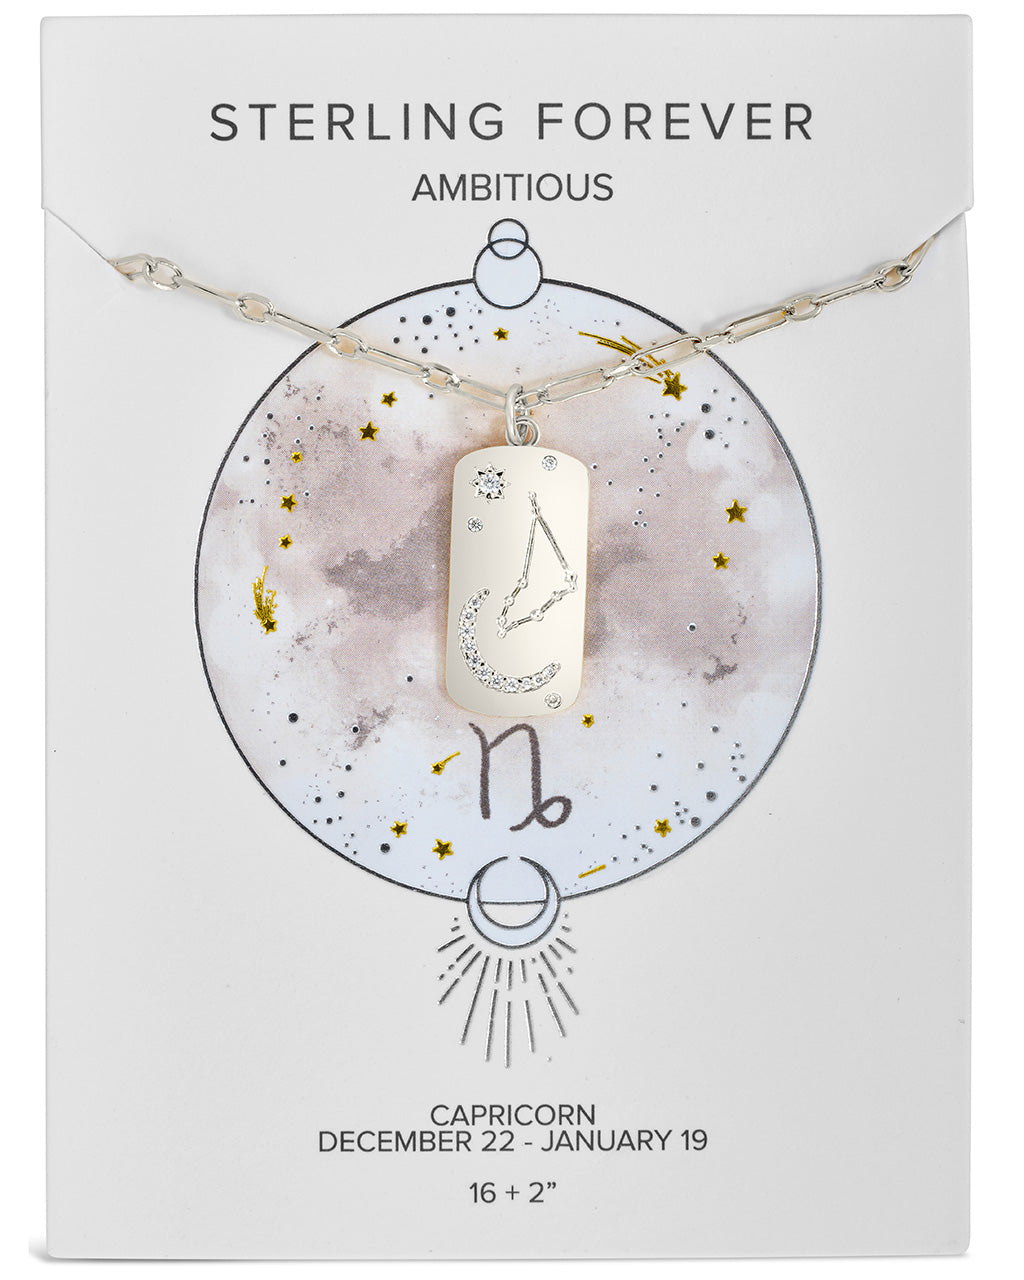 Constellation Dog Tag Necklace Necklace Sterling Forever Silver Capricorn (Dec 22 - Jan 19) 